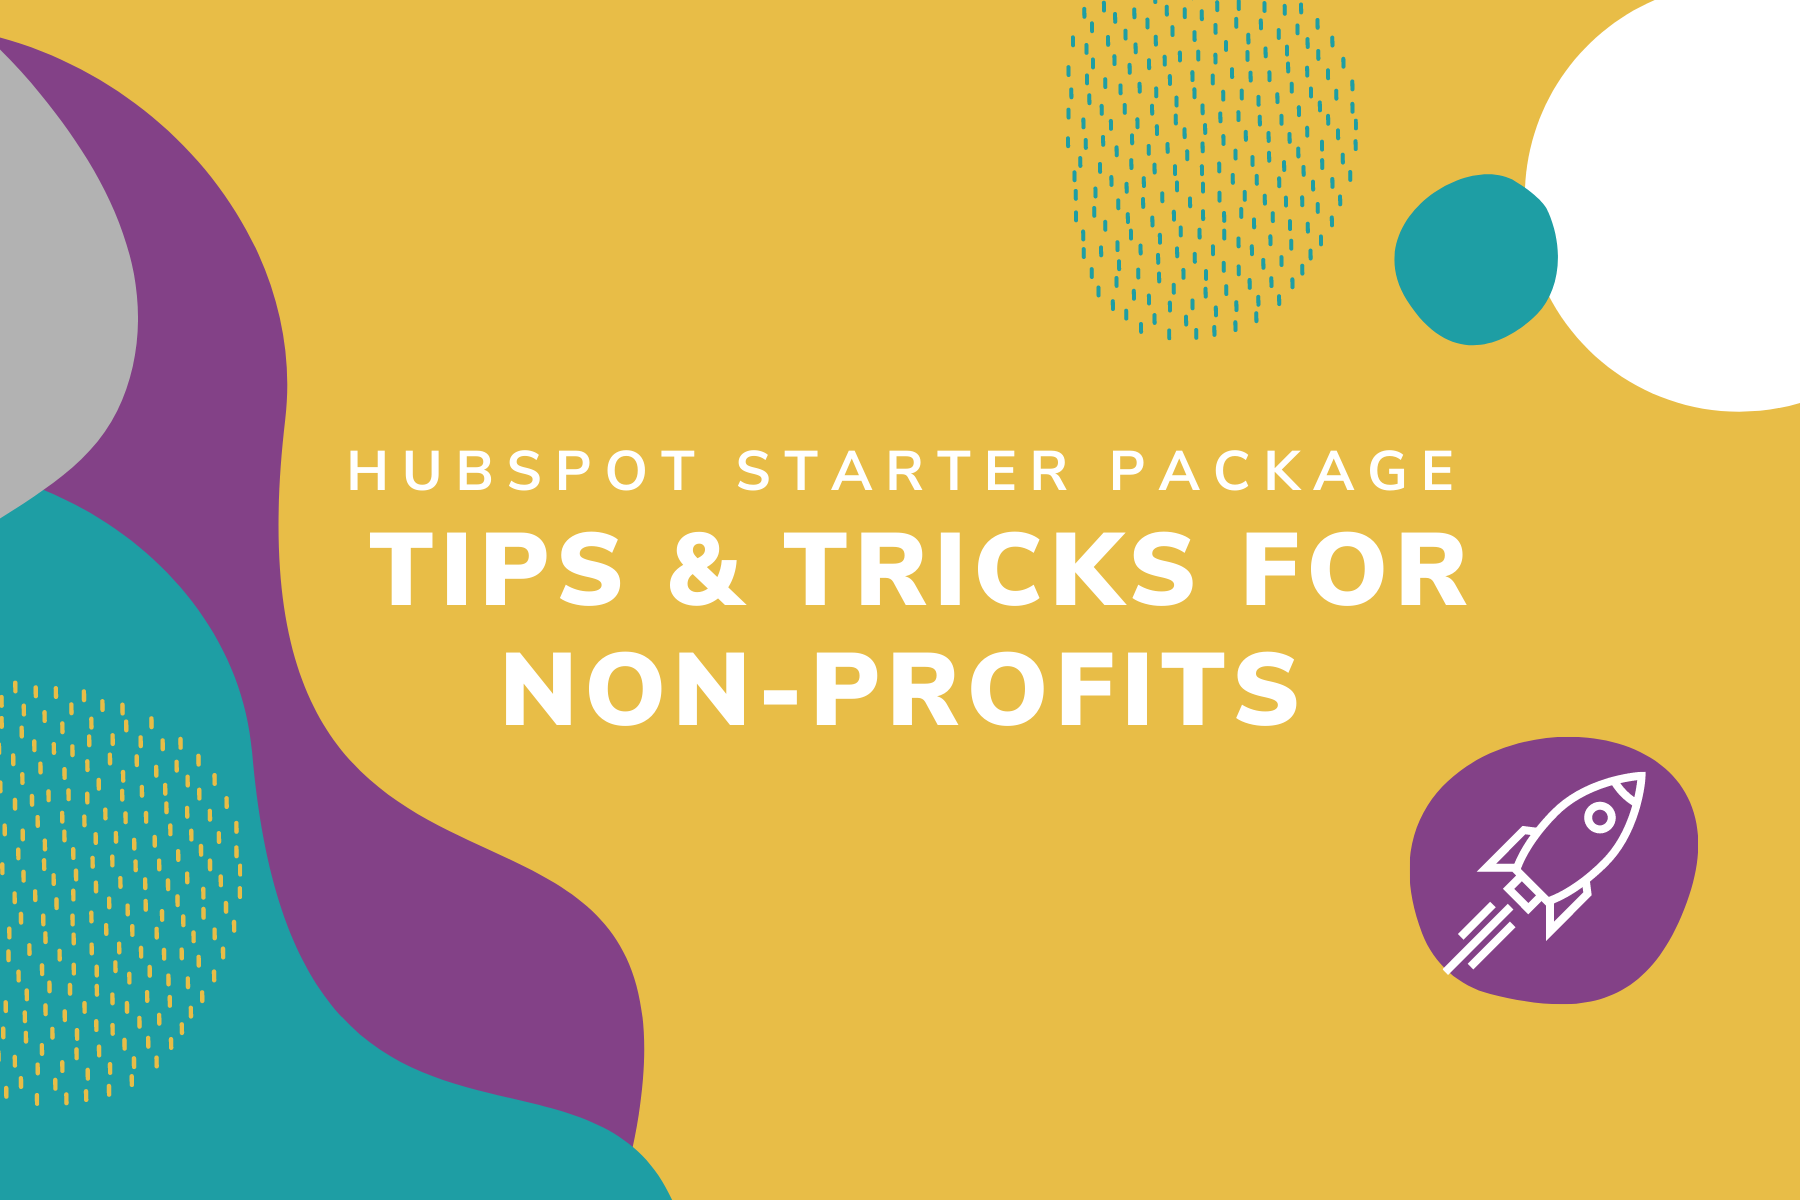 HubSpot starter package tips and tricks for non-profits